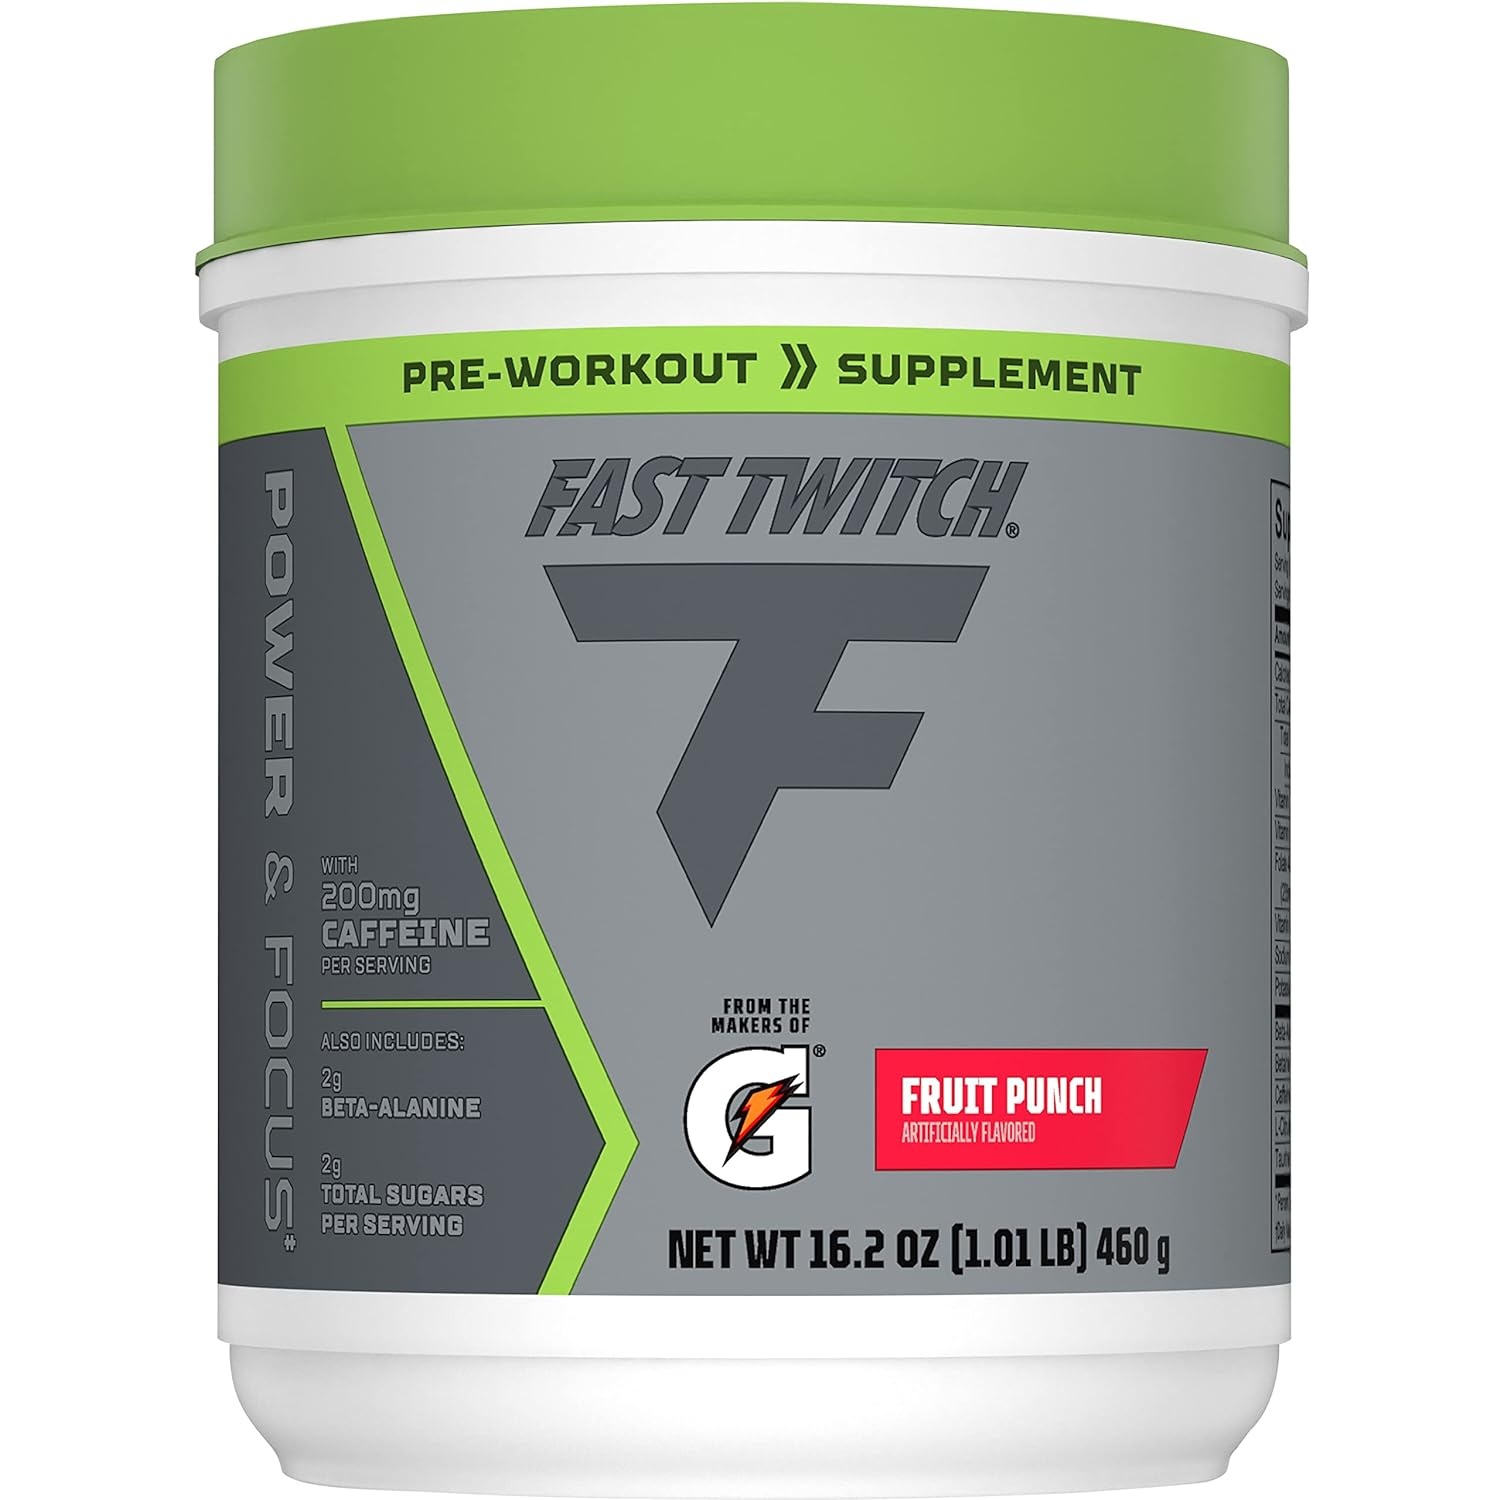 Fast Twitch, Caffeinated Pre-Workout Supplement Mix, Fruit Punch, 1.01lb (Pack of 1) Cannister (Packaging May Vary)